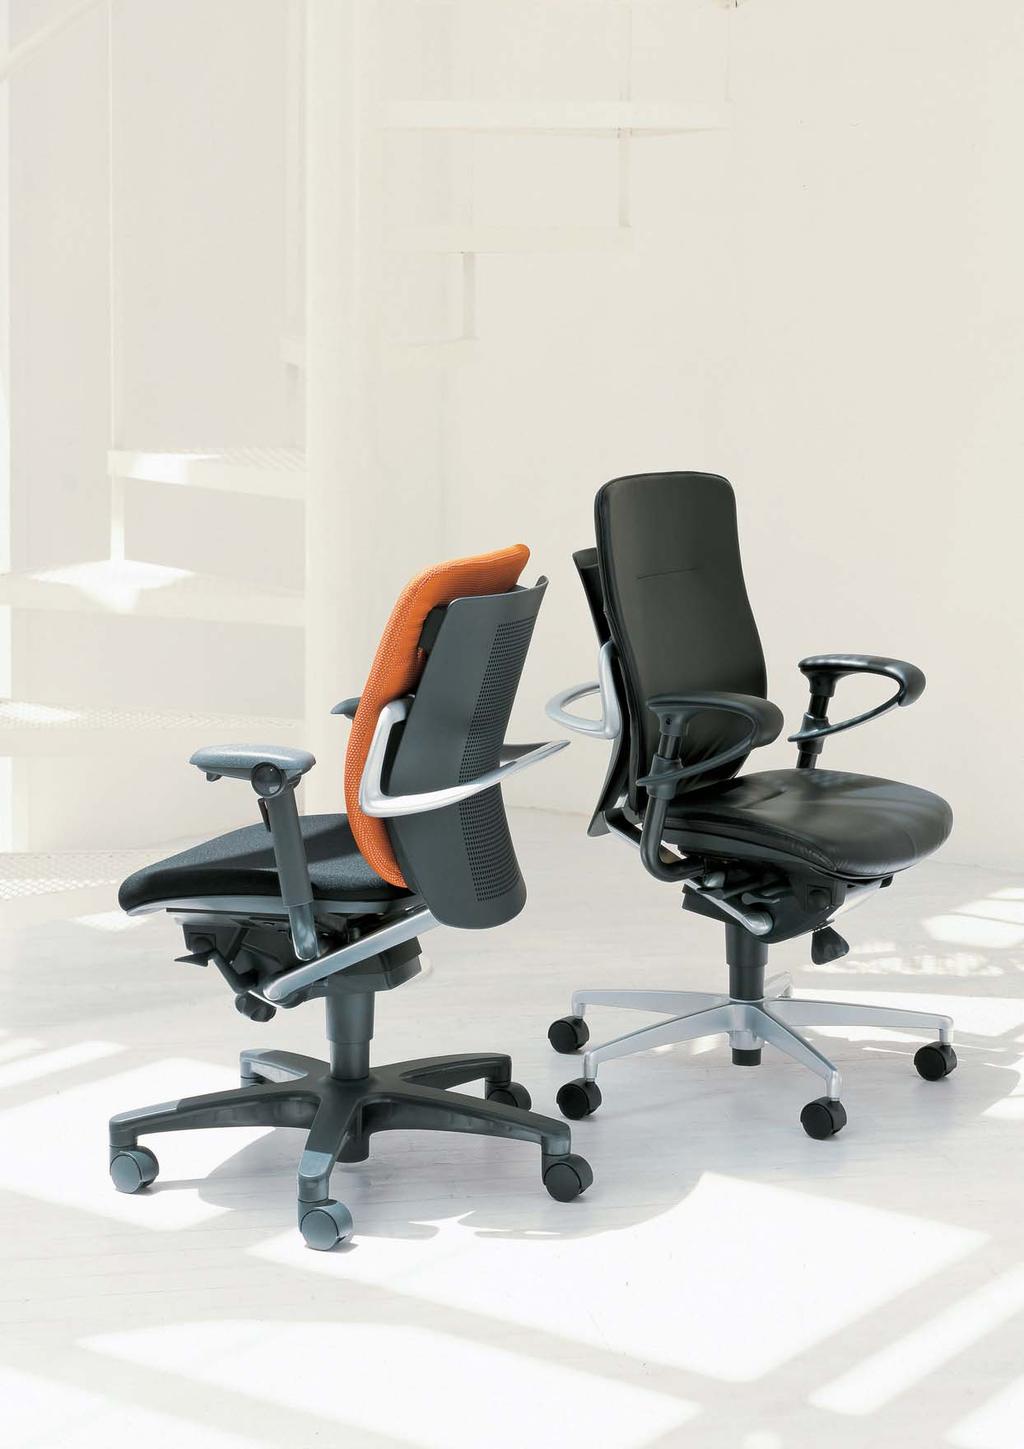 LEVINO chairs allow you